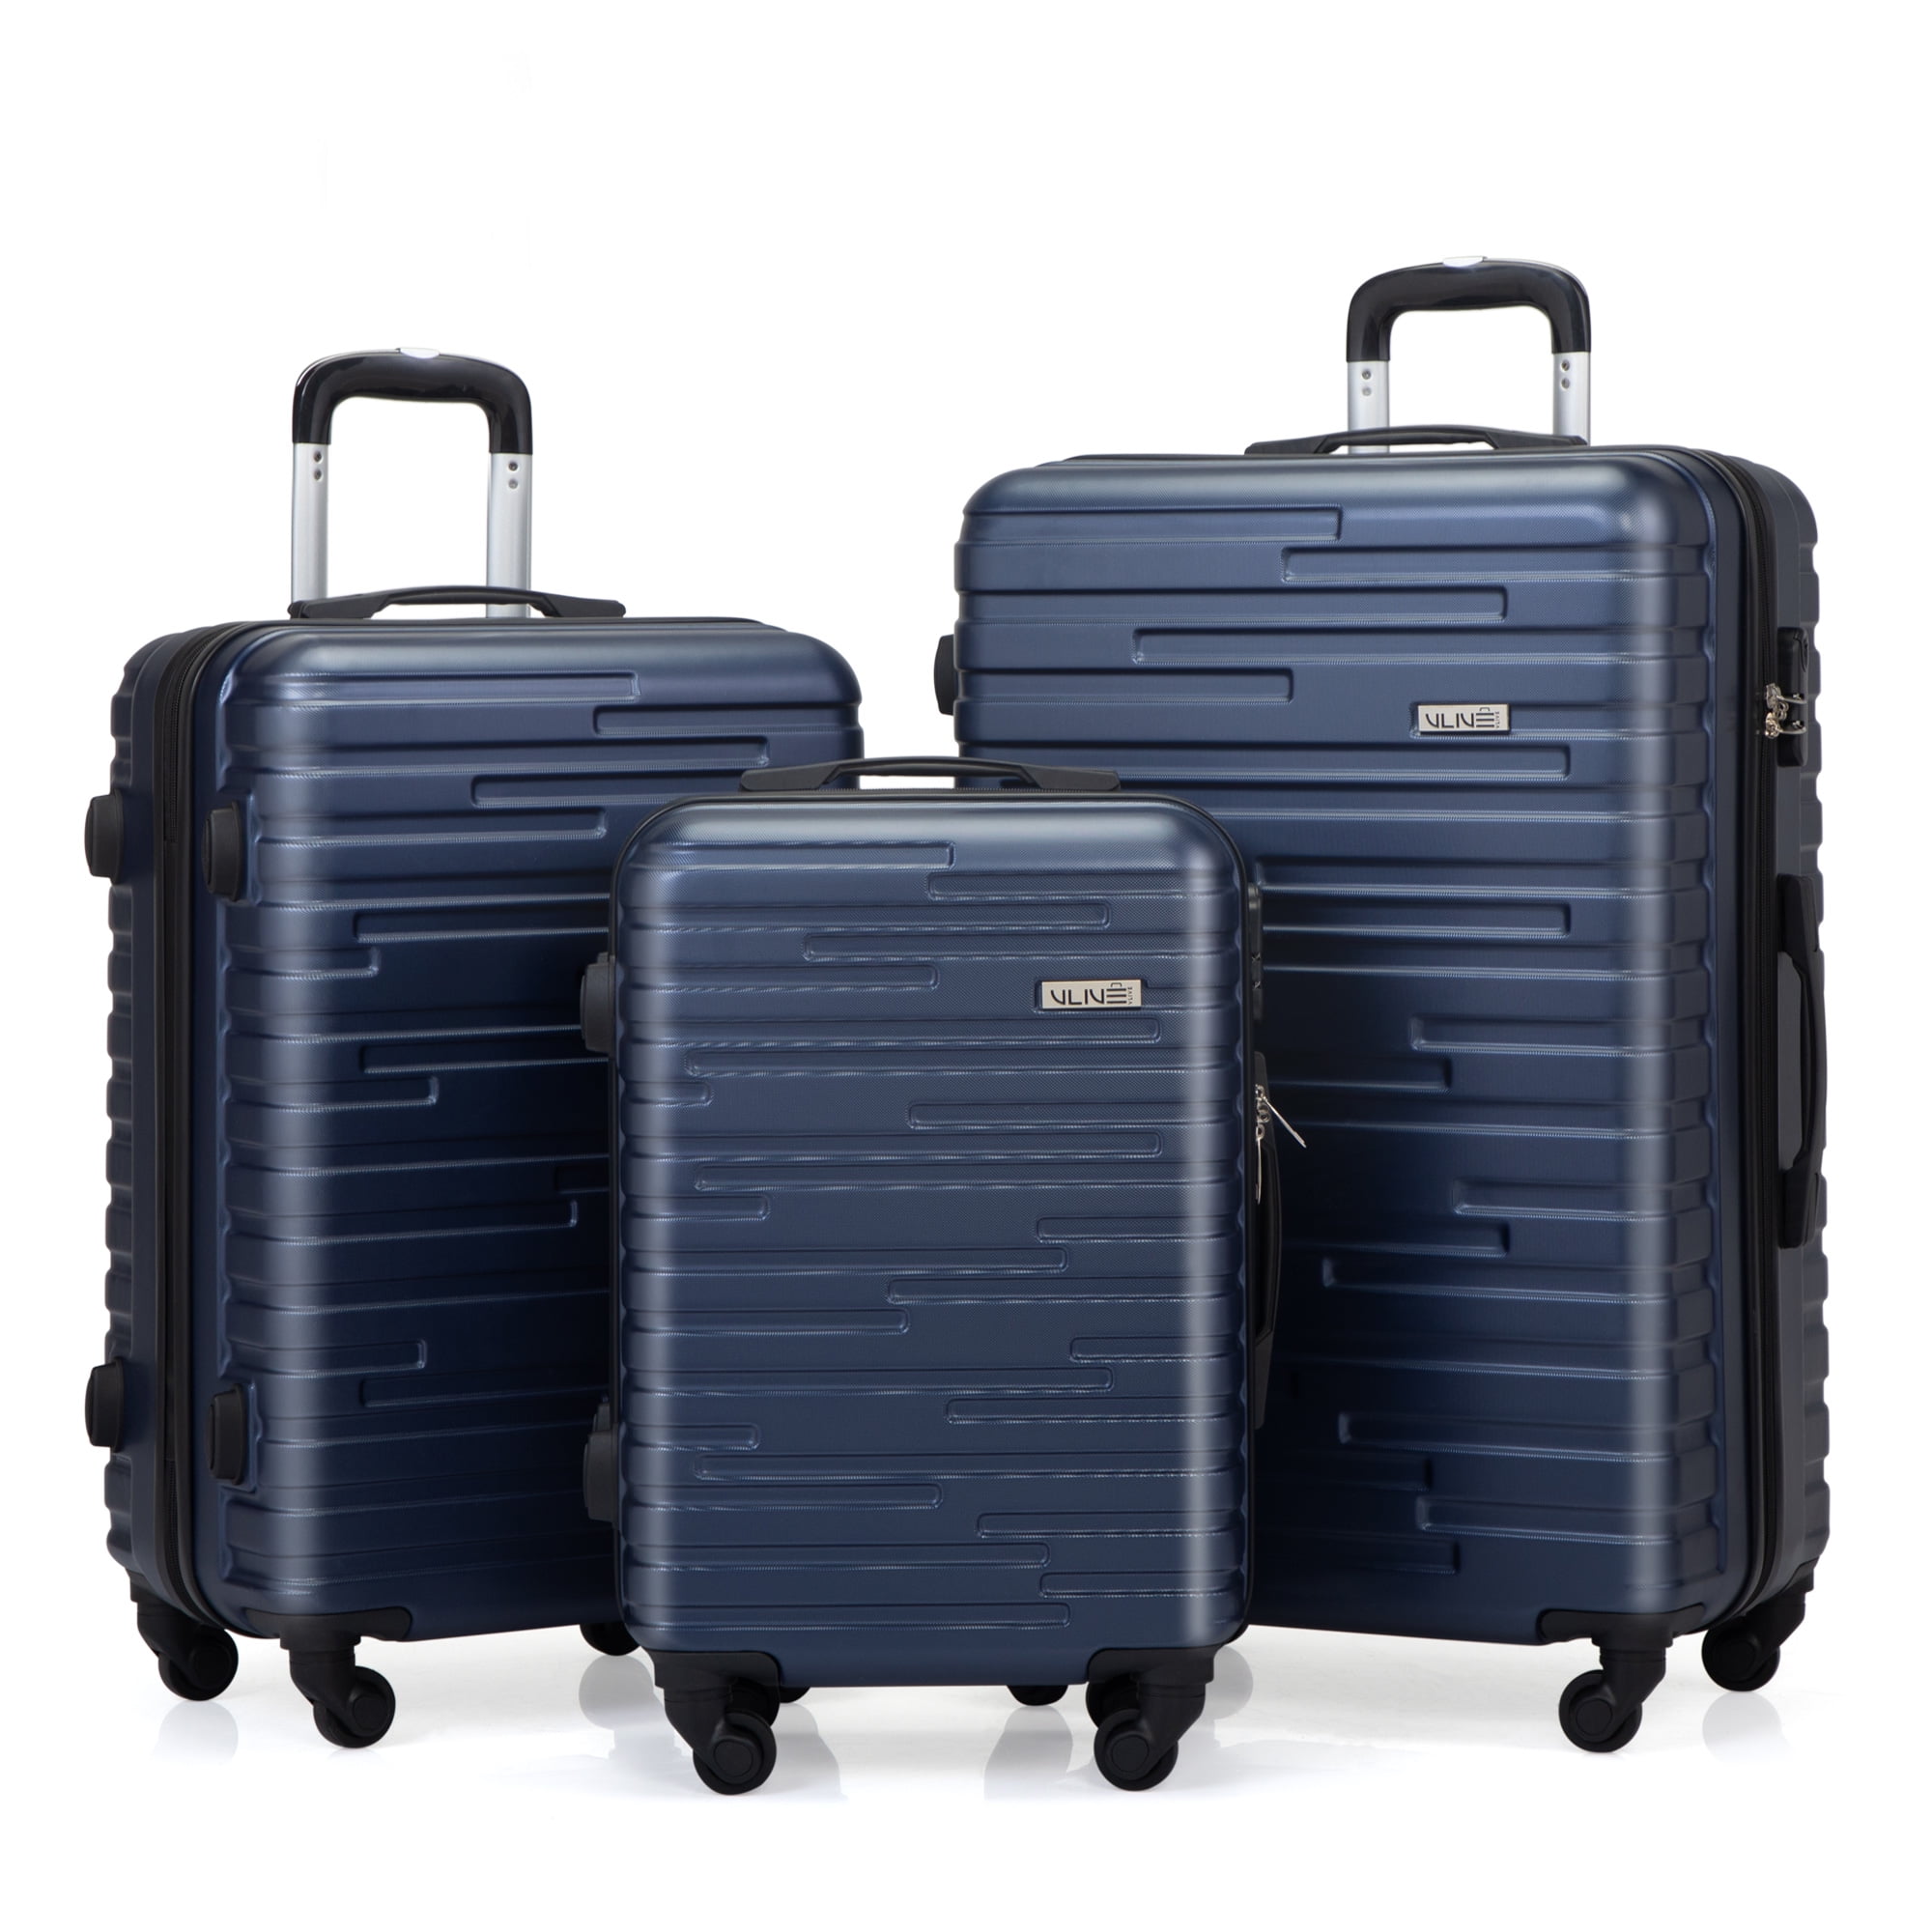 VLIVE 3 Pcs Luggage Travel Set Bag ABS Hard Shell Trolley Commercial  Suitcase W/ Spinner Wheels 